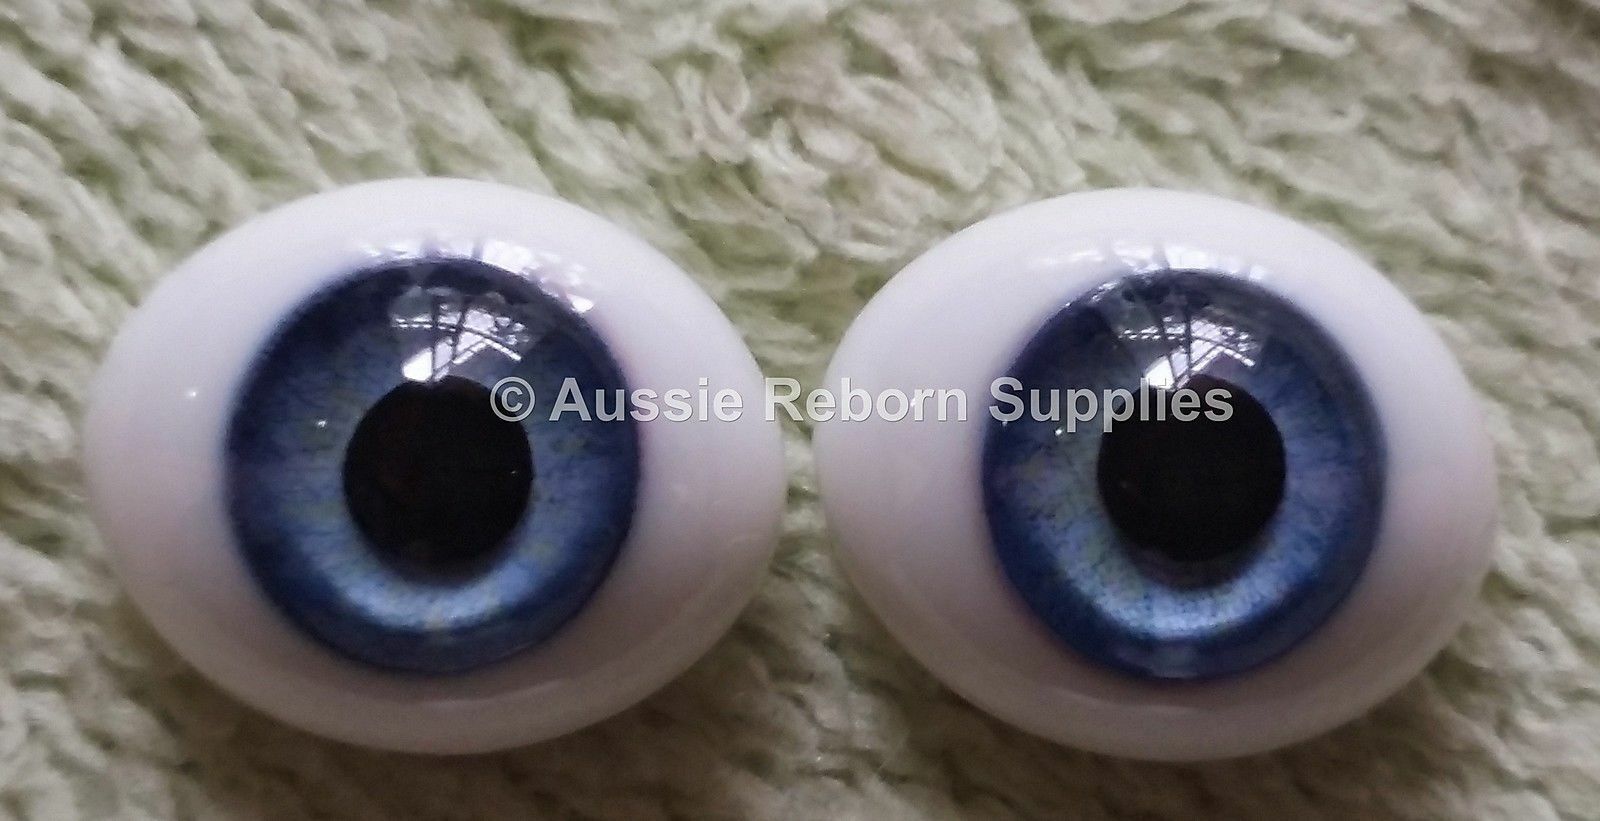 14mm Sky Blue Oval Glass Eyes Reborn Baby Doll Making Supplies